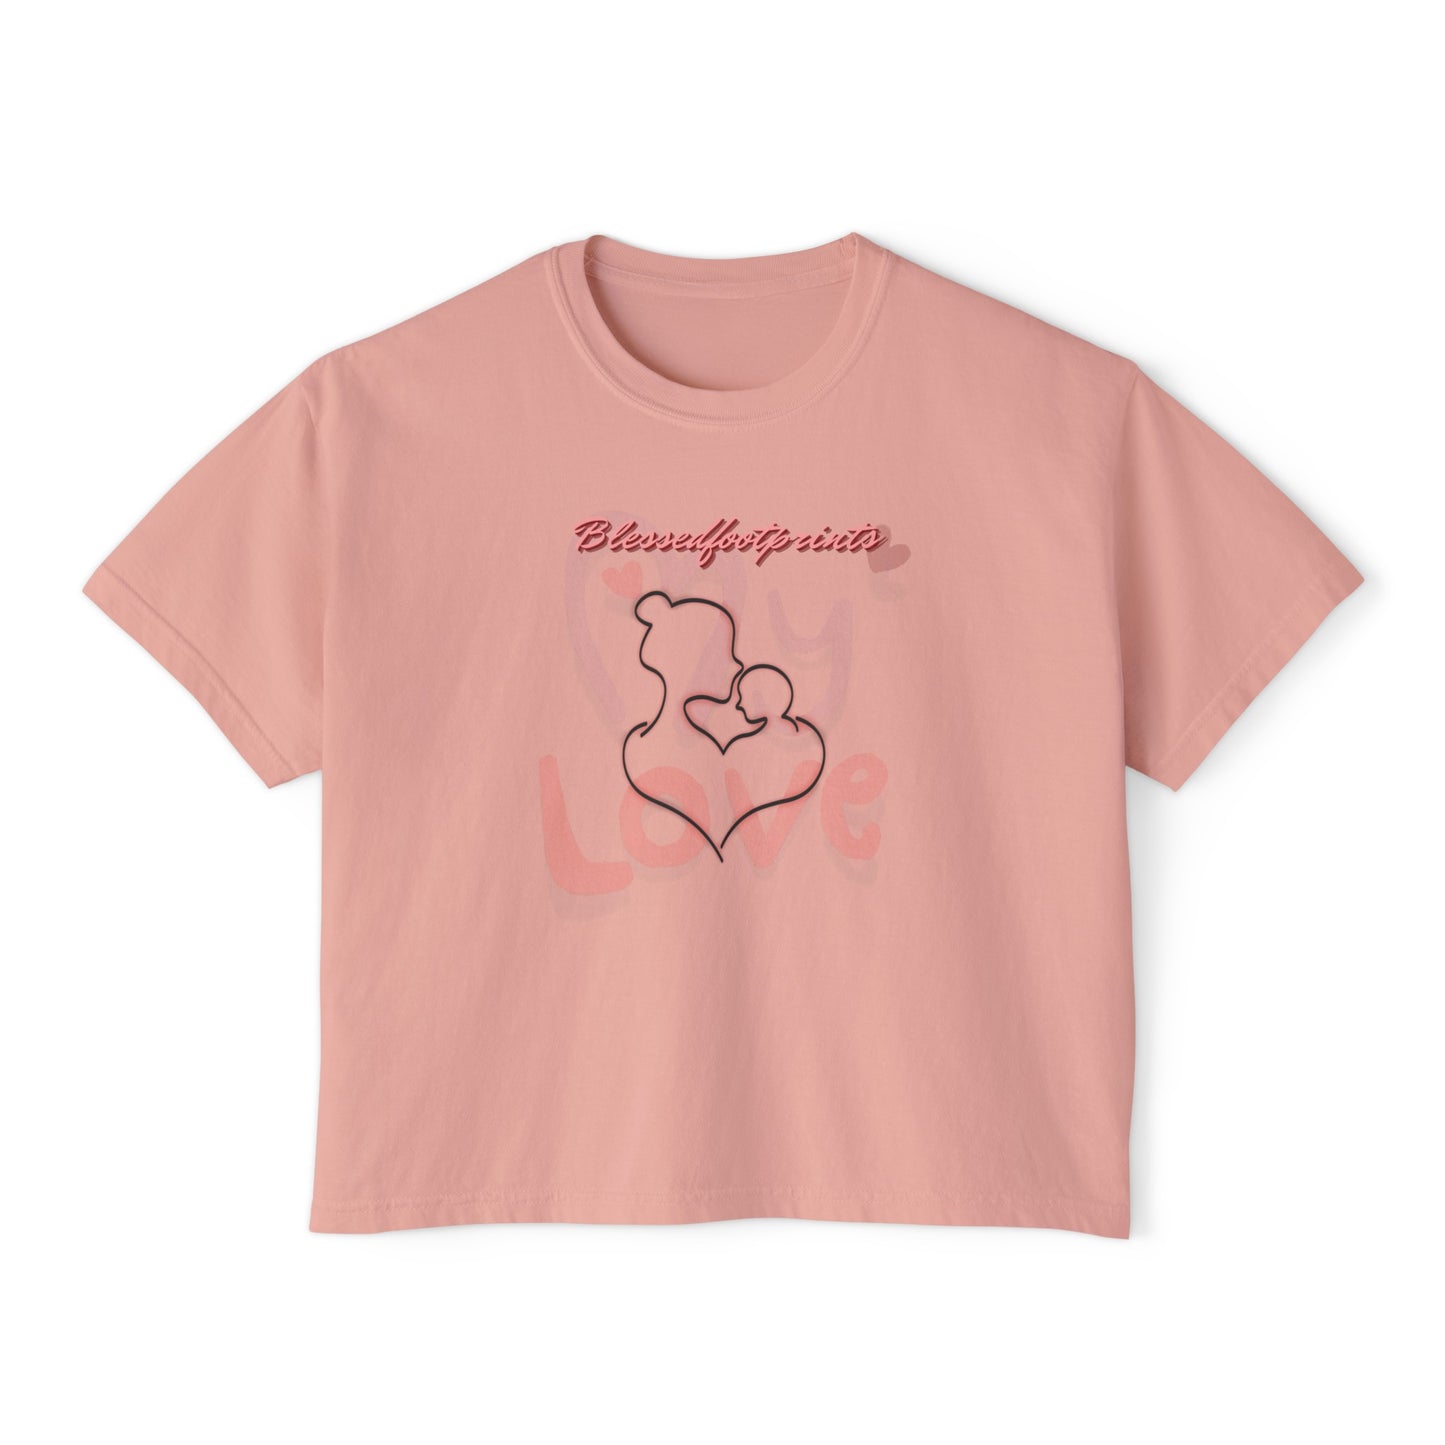 My Love Boxy Tee - BlessedFootprints Collection